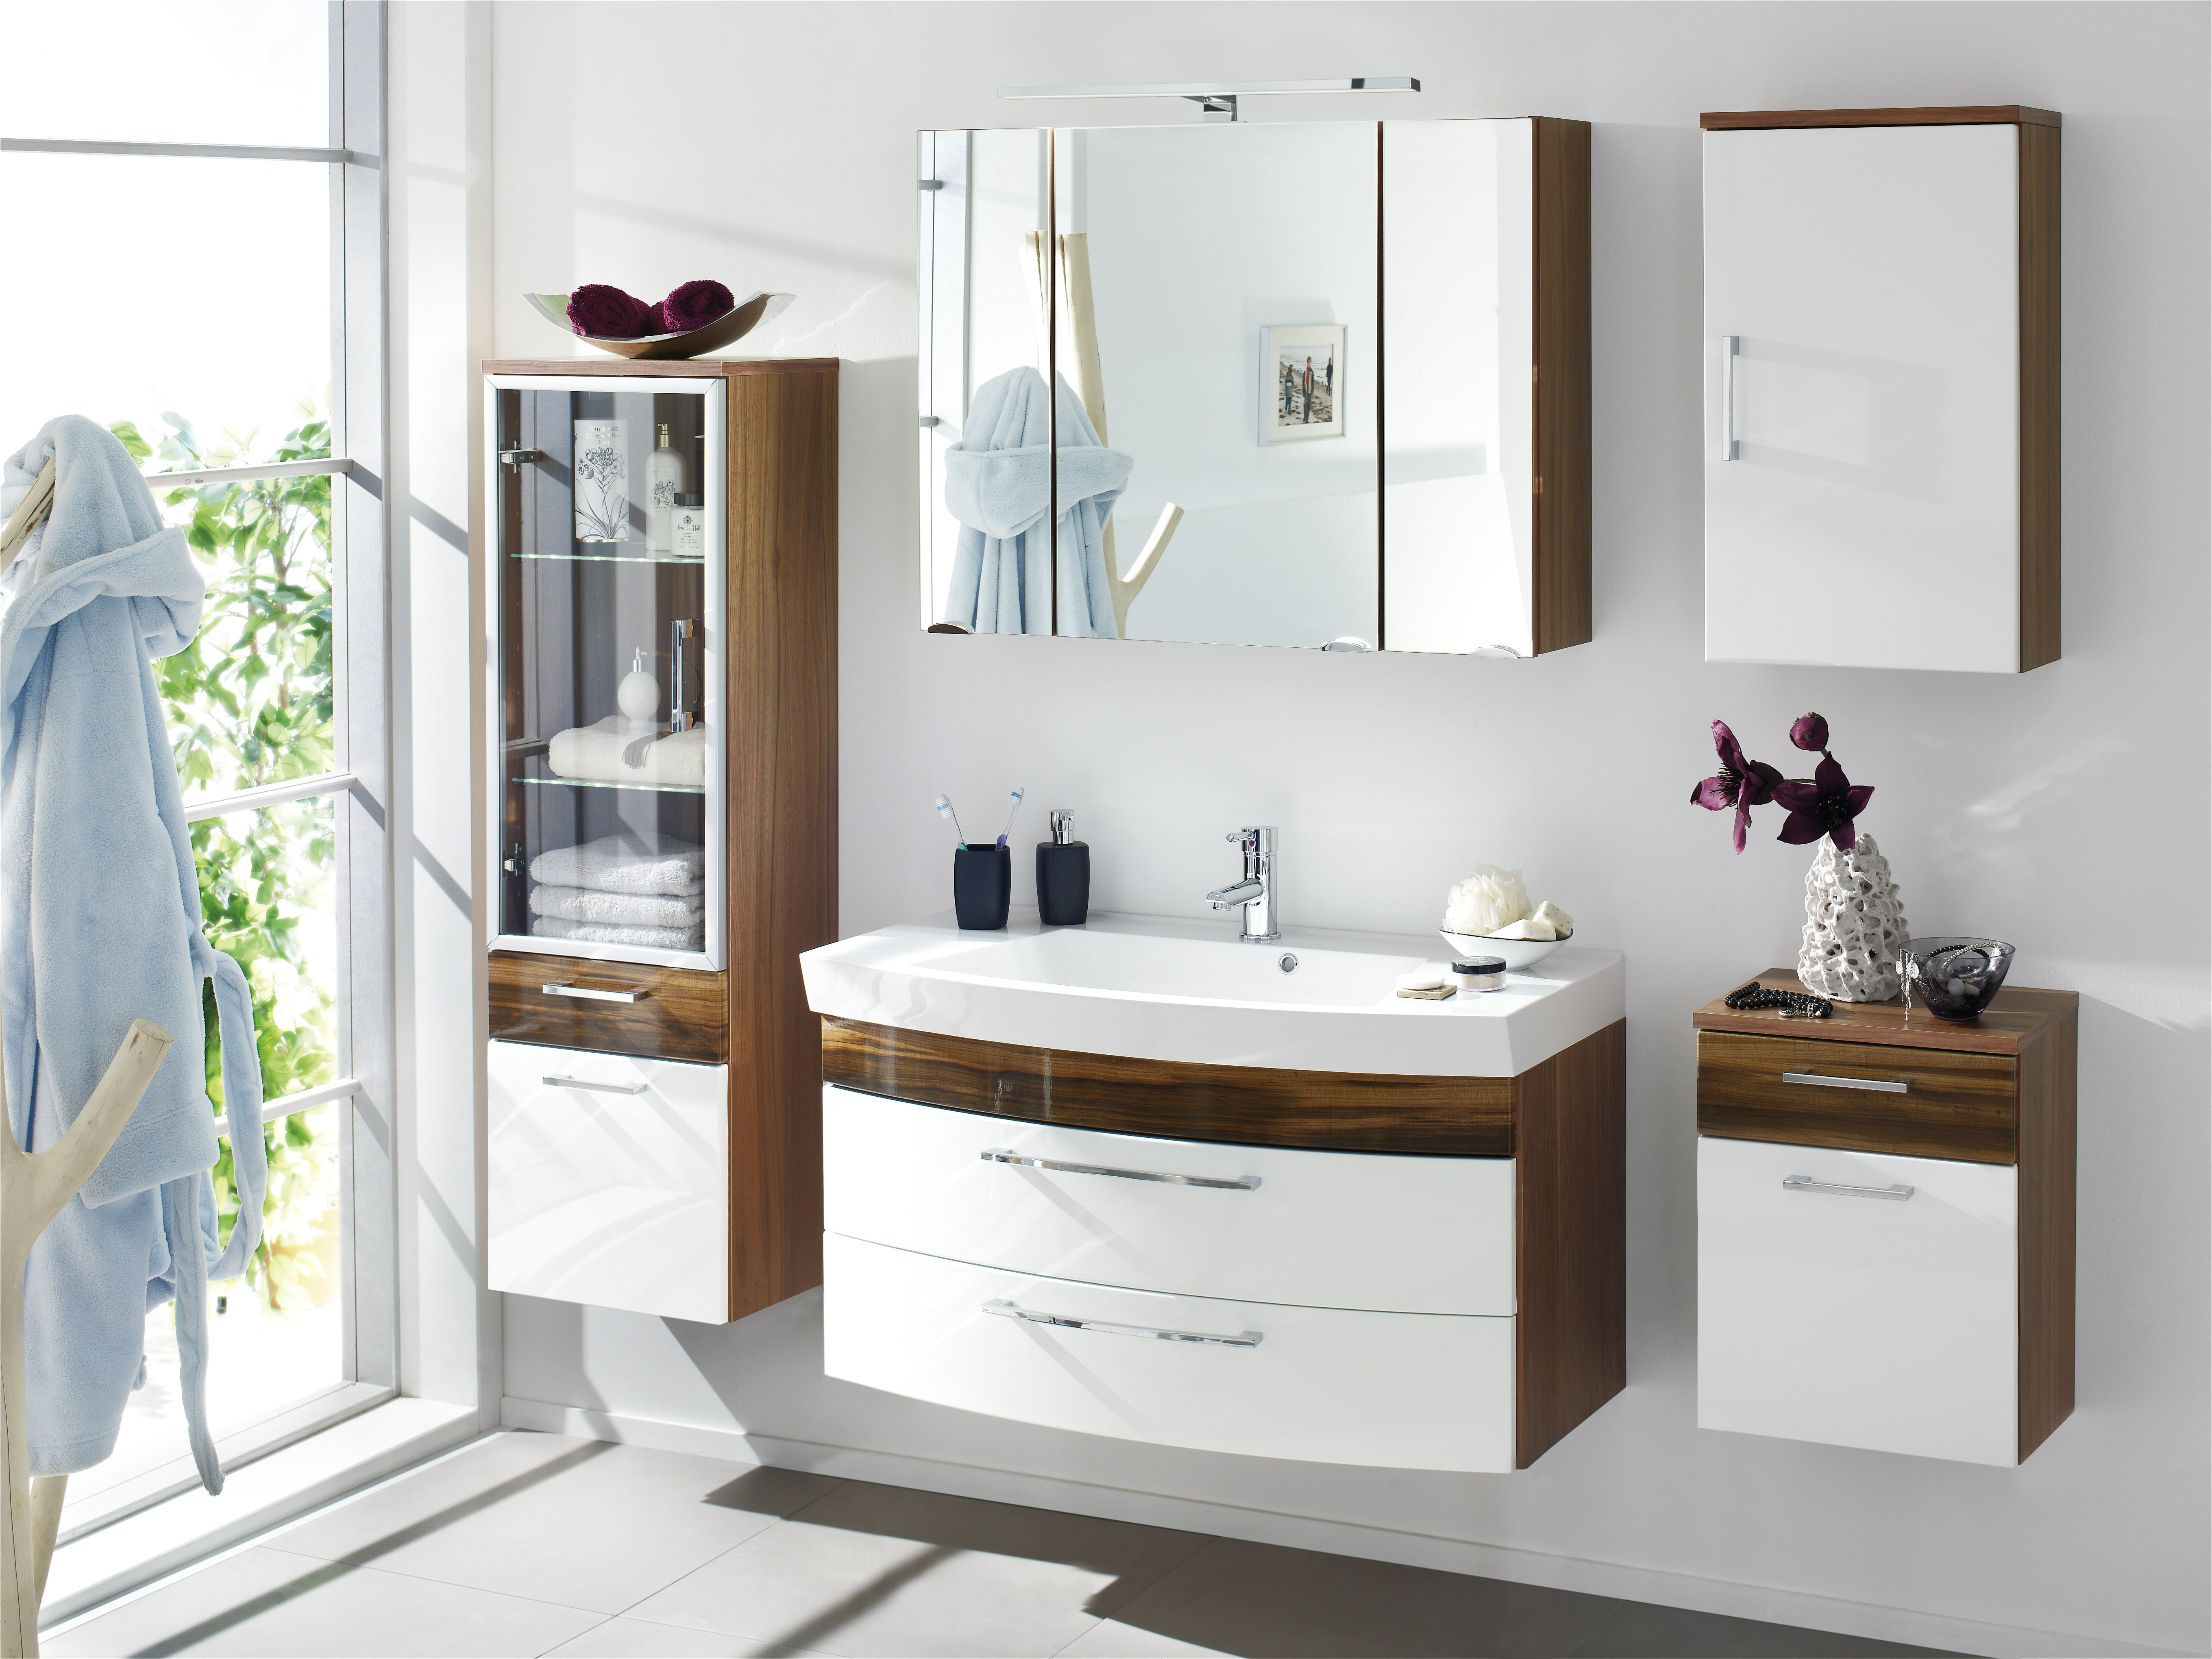 Bathroom Furniture Set Malema 100cm Walnut White With Rounded Front throughout sizing 5440 X 4080